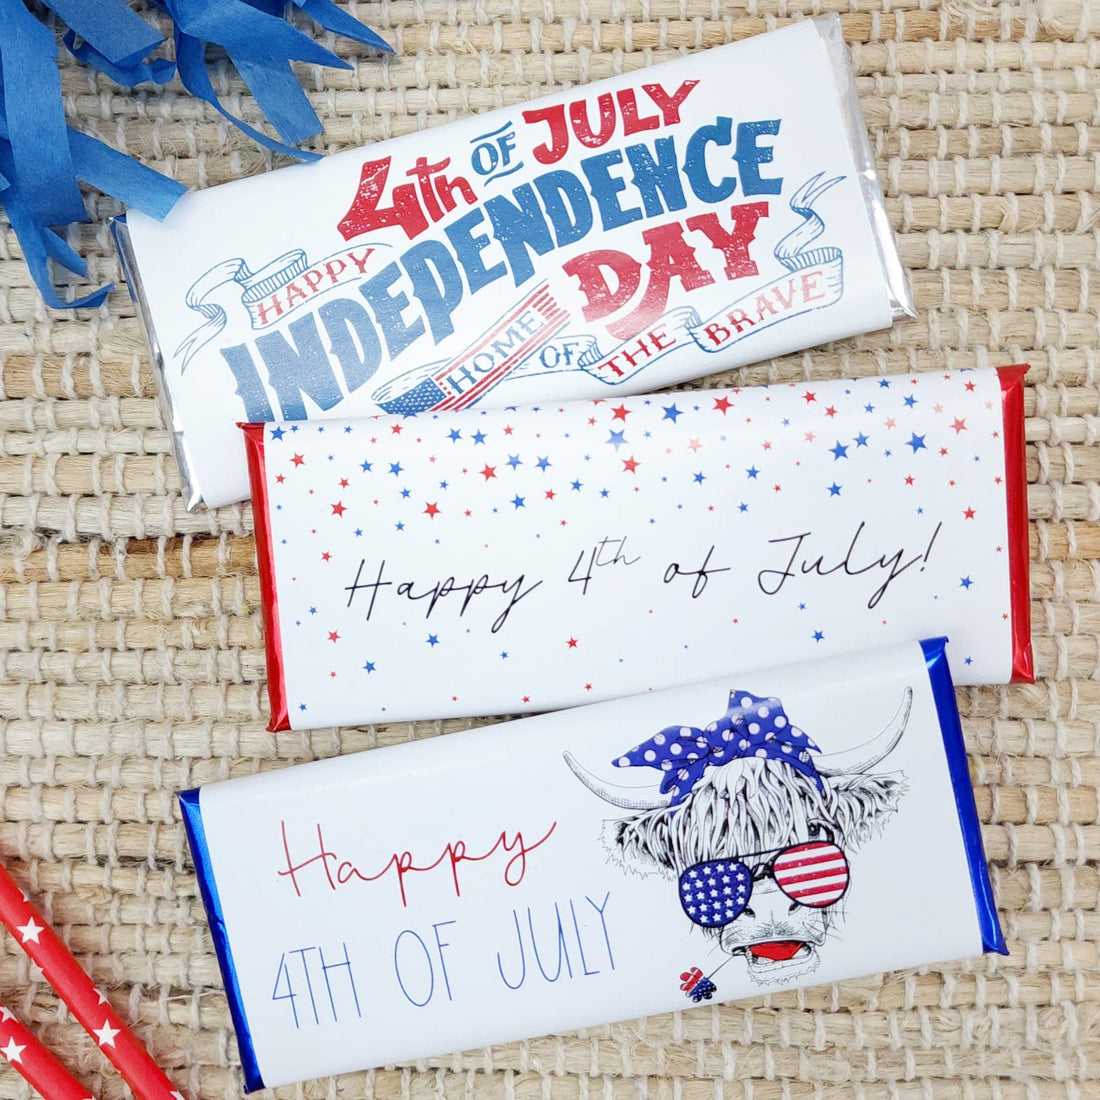 Celebrate Independence Day with Personalized Candy Bar Wrappers!